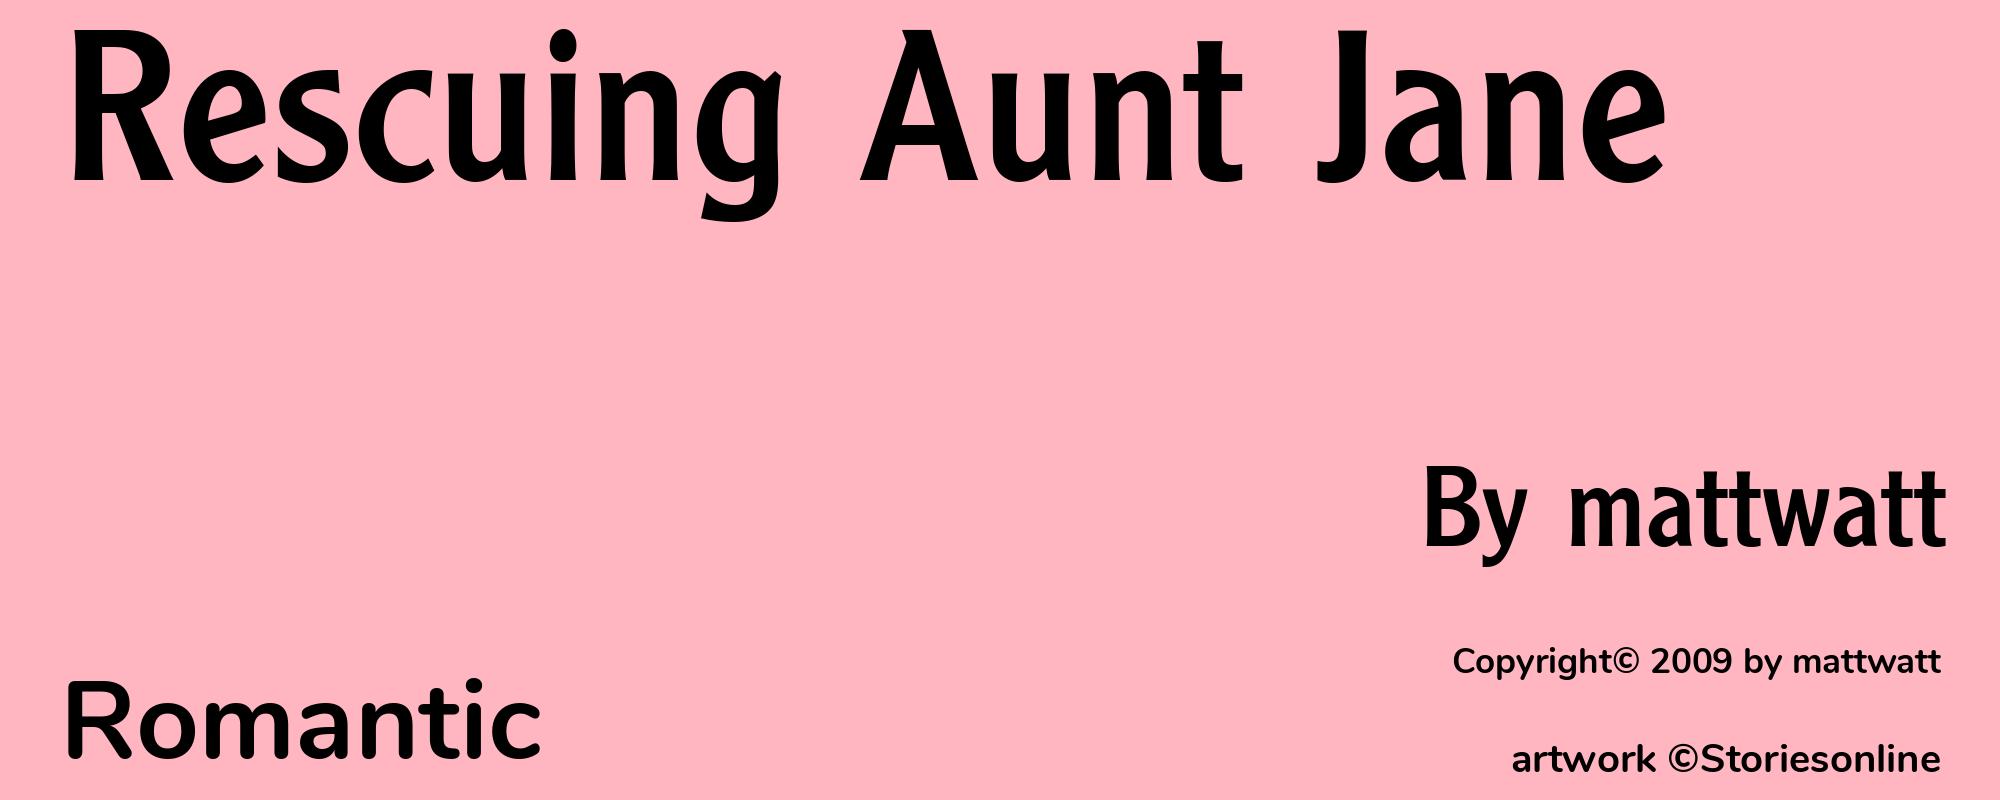 Rescuing Aunt Jane - Cover